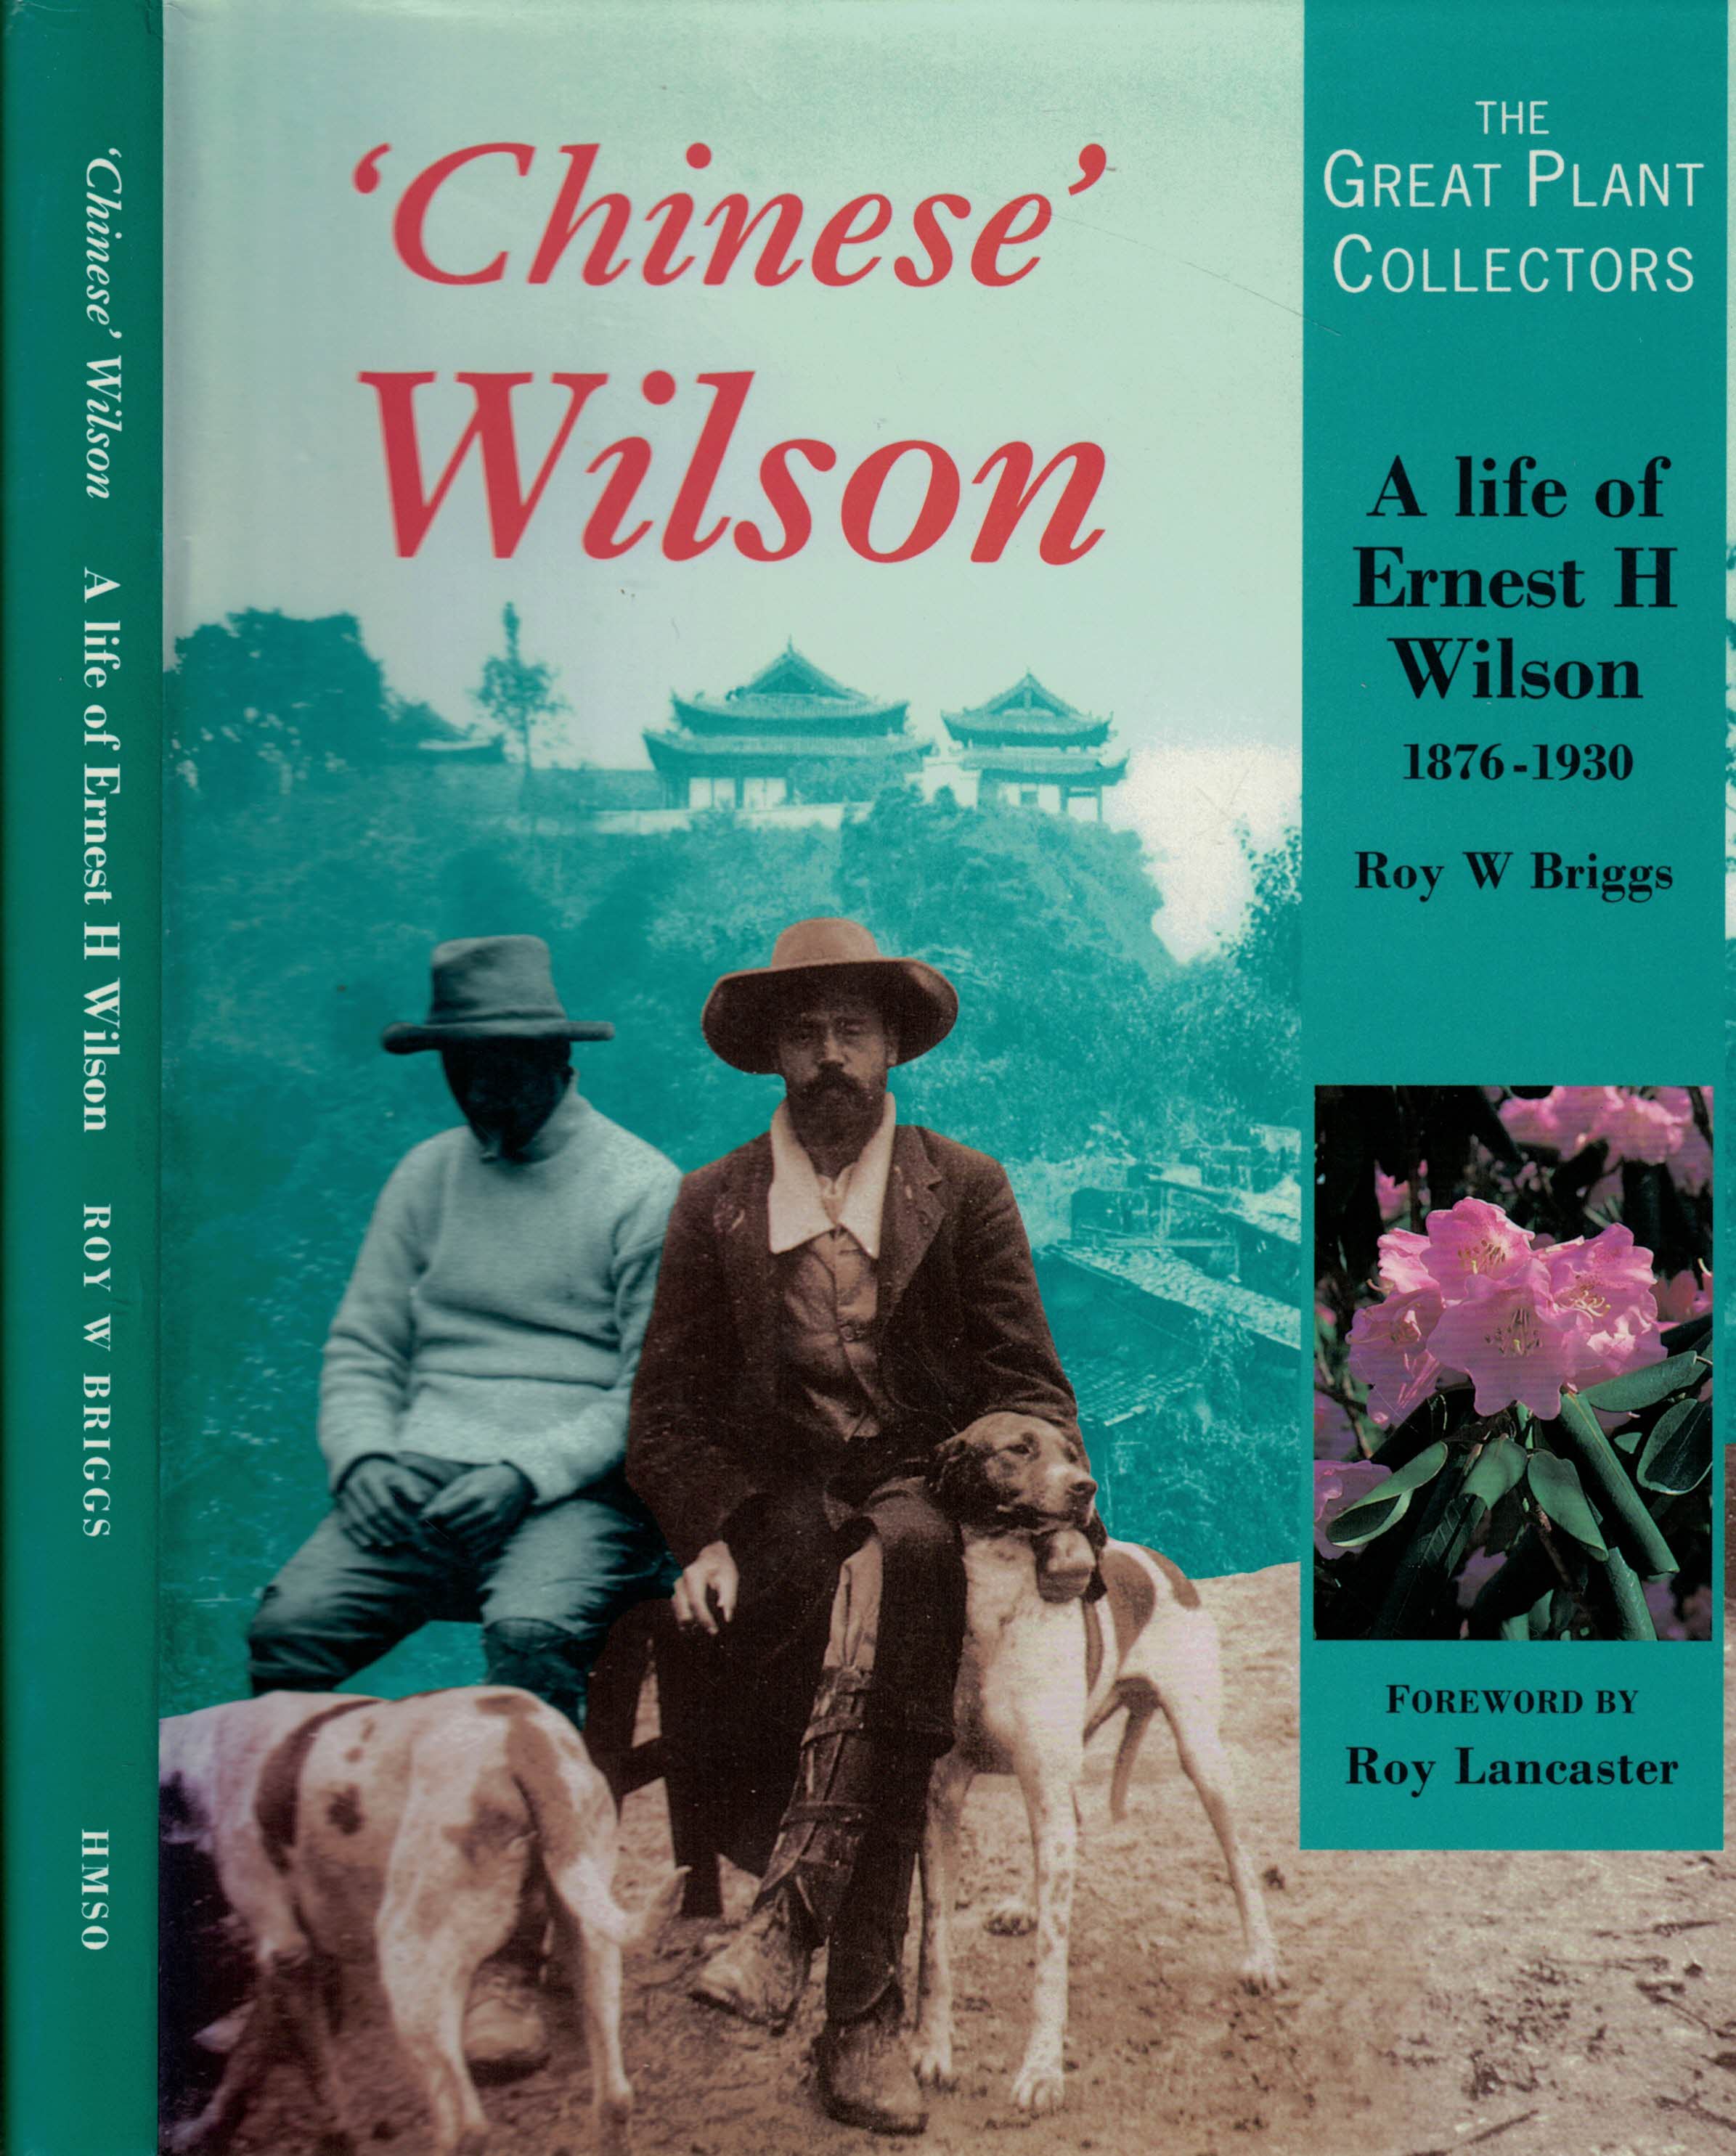 'Chinese' Wilson: A Life of Ernest H Wilson. 1876-1930.